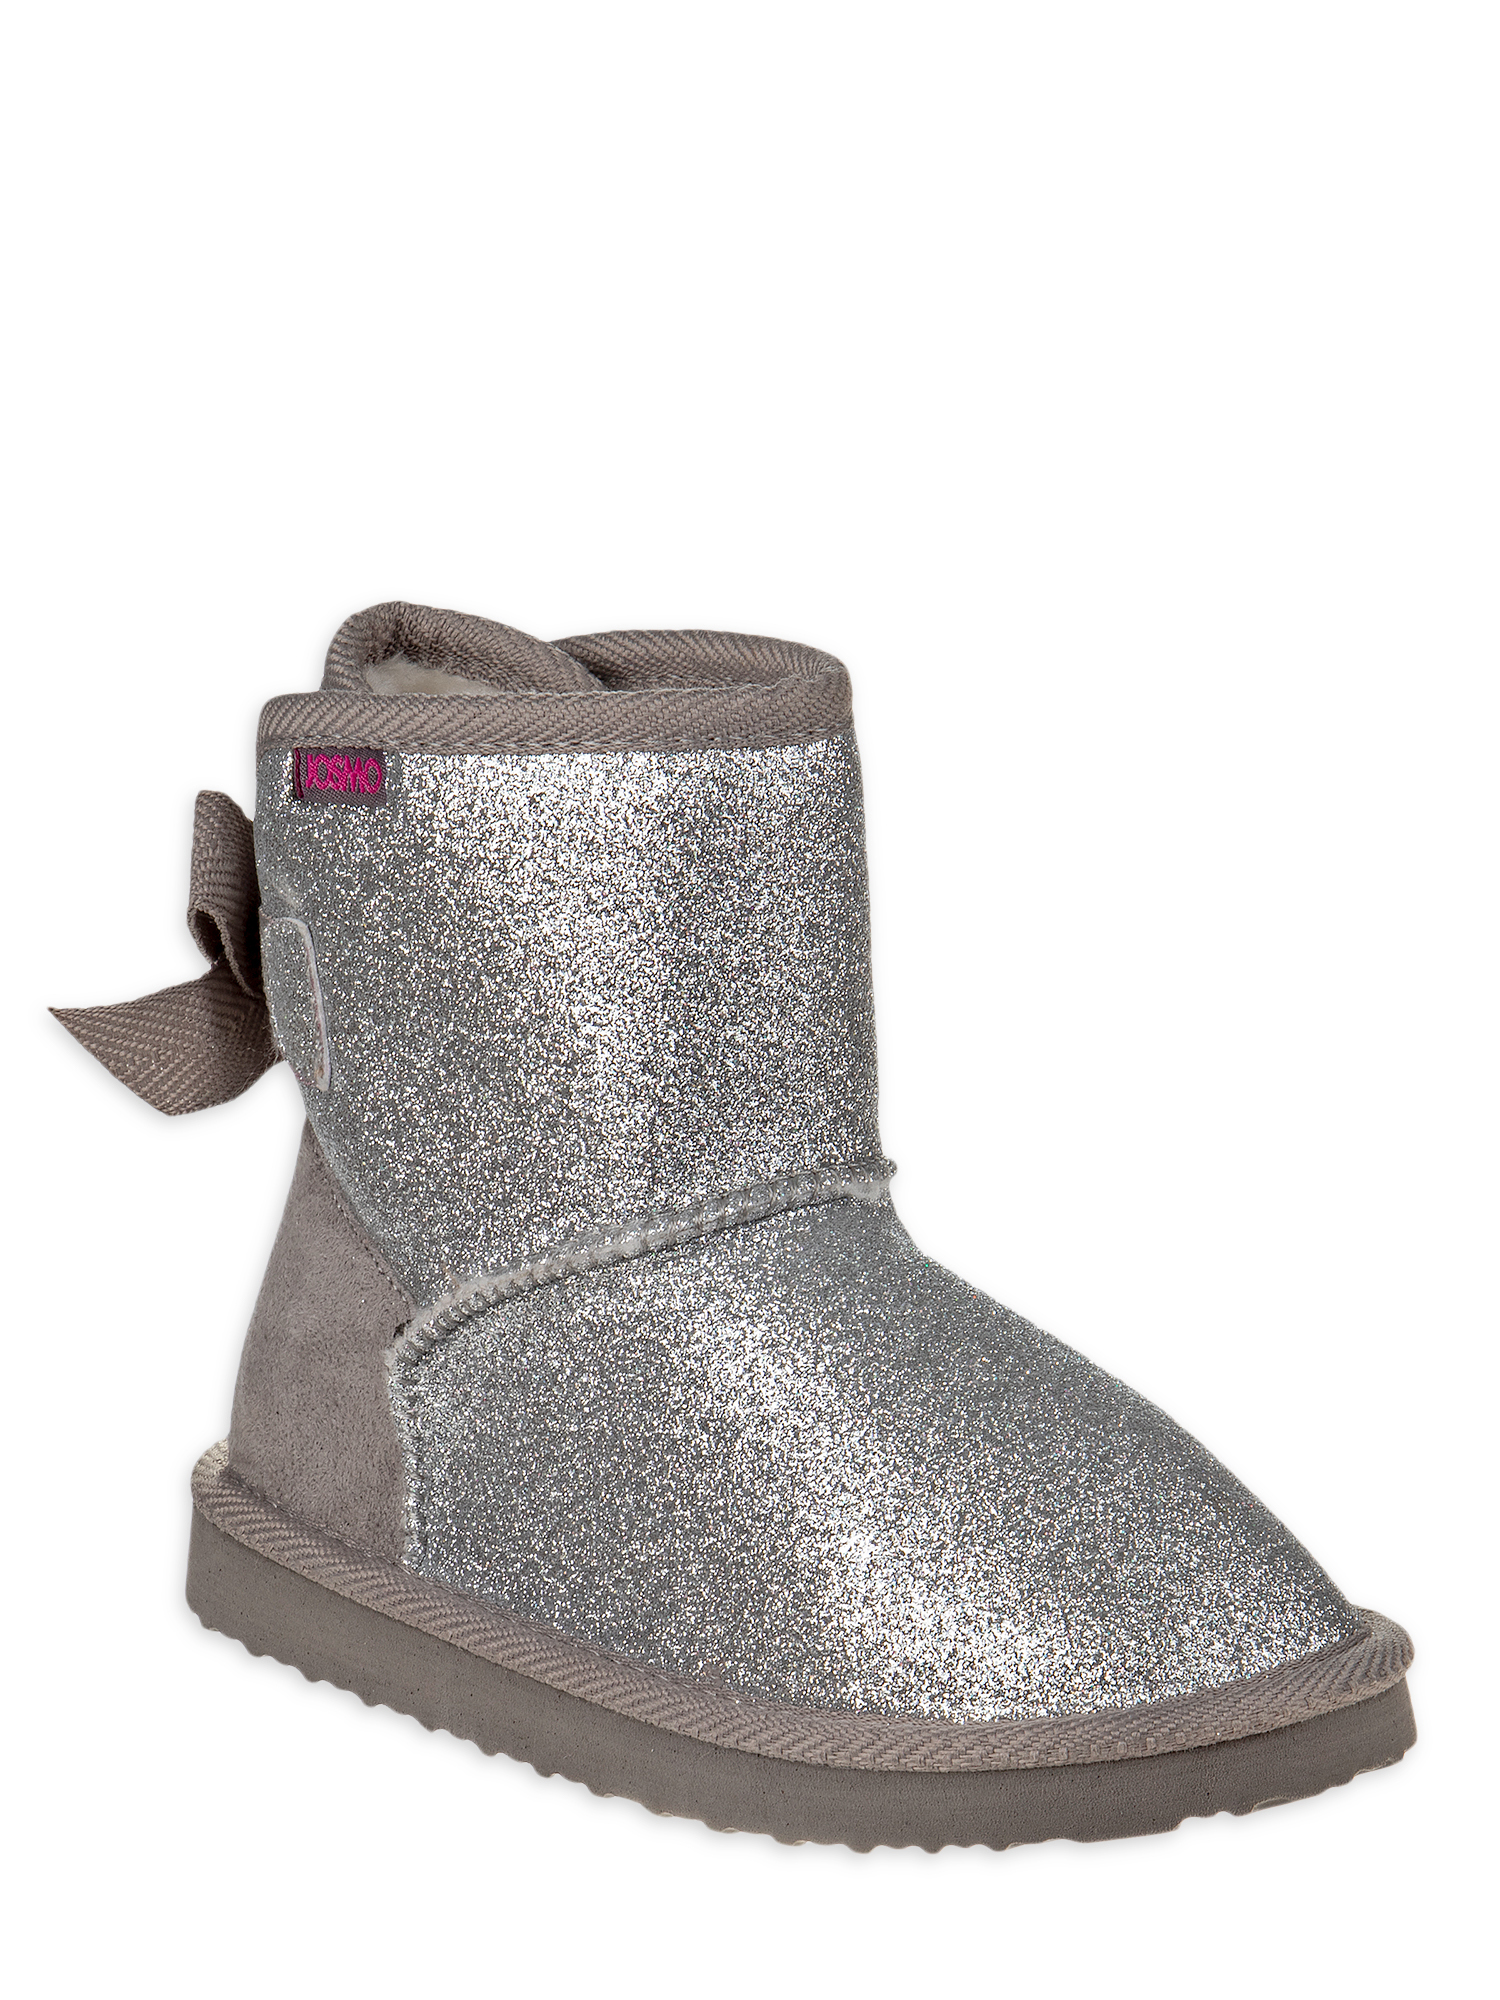 Josmo Glitter & Bows Faux Shearling Ankle Boot (Toddler Girls) - image 1 of 5